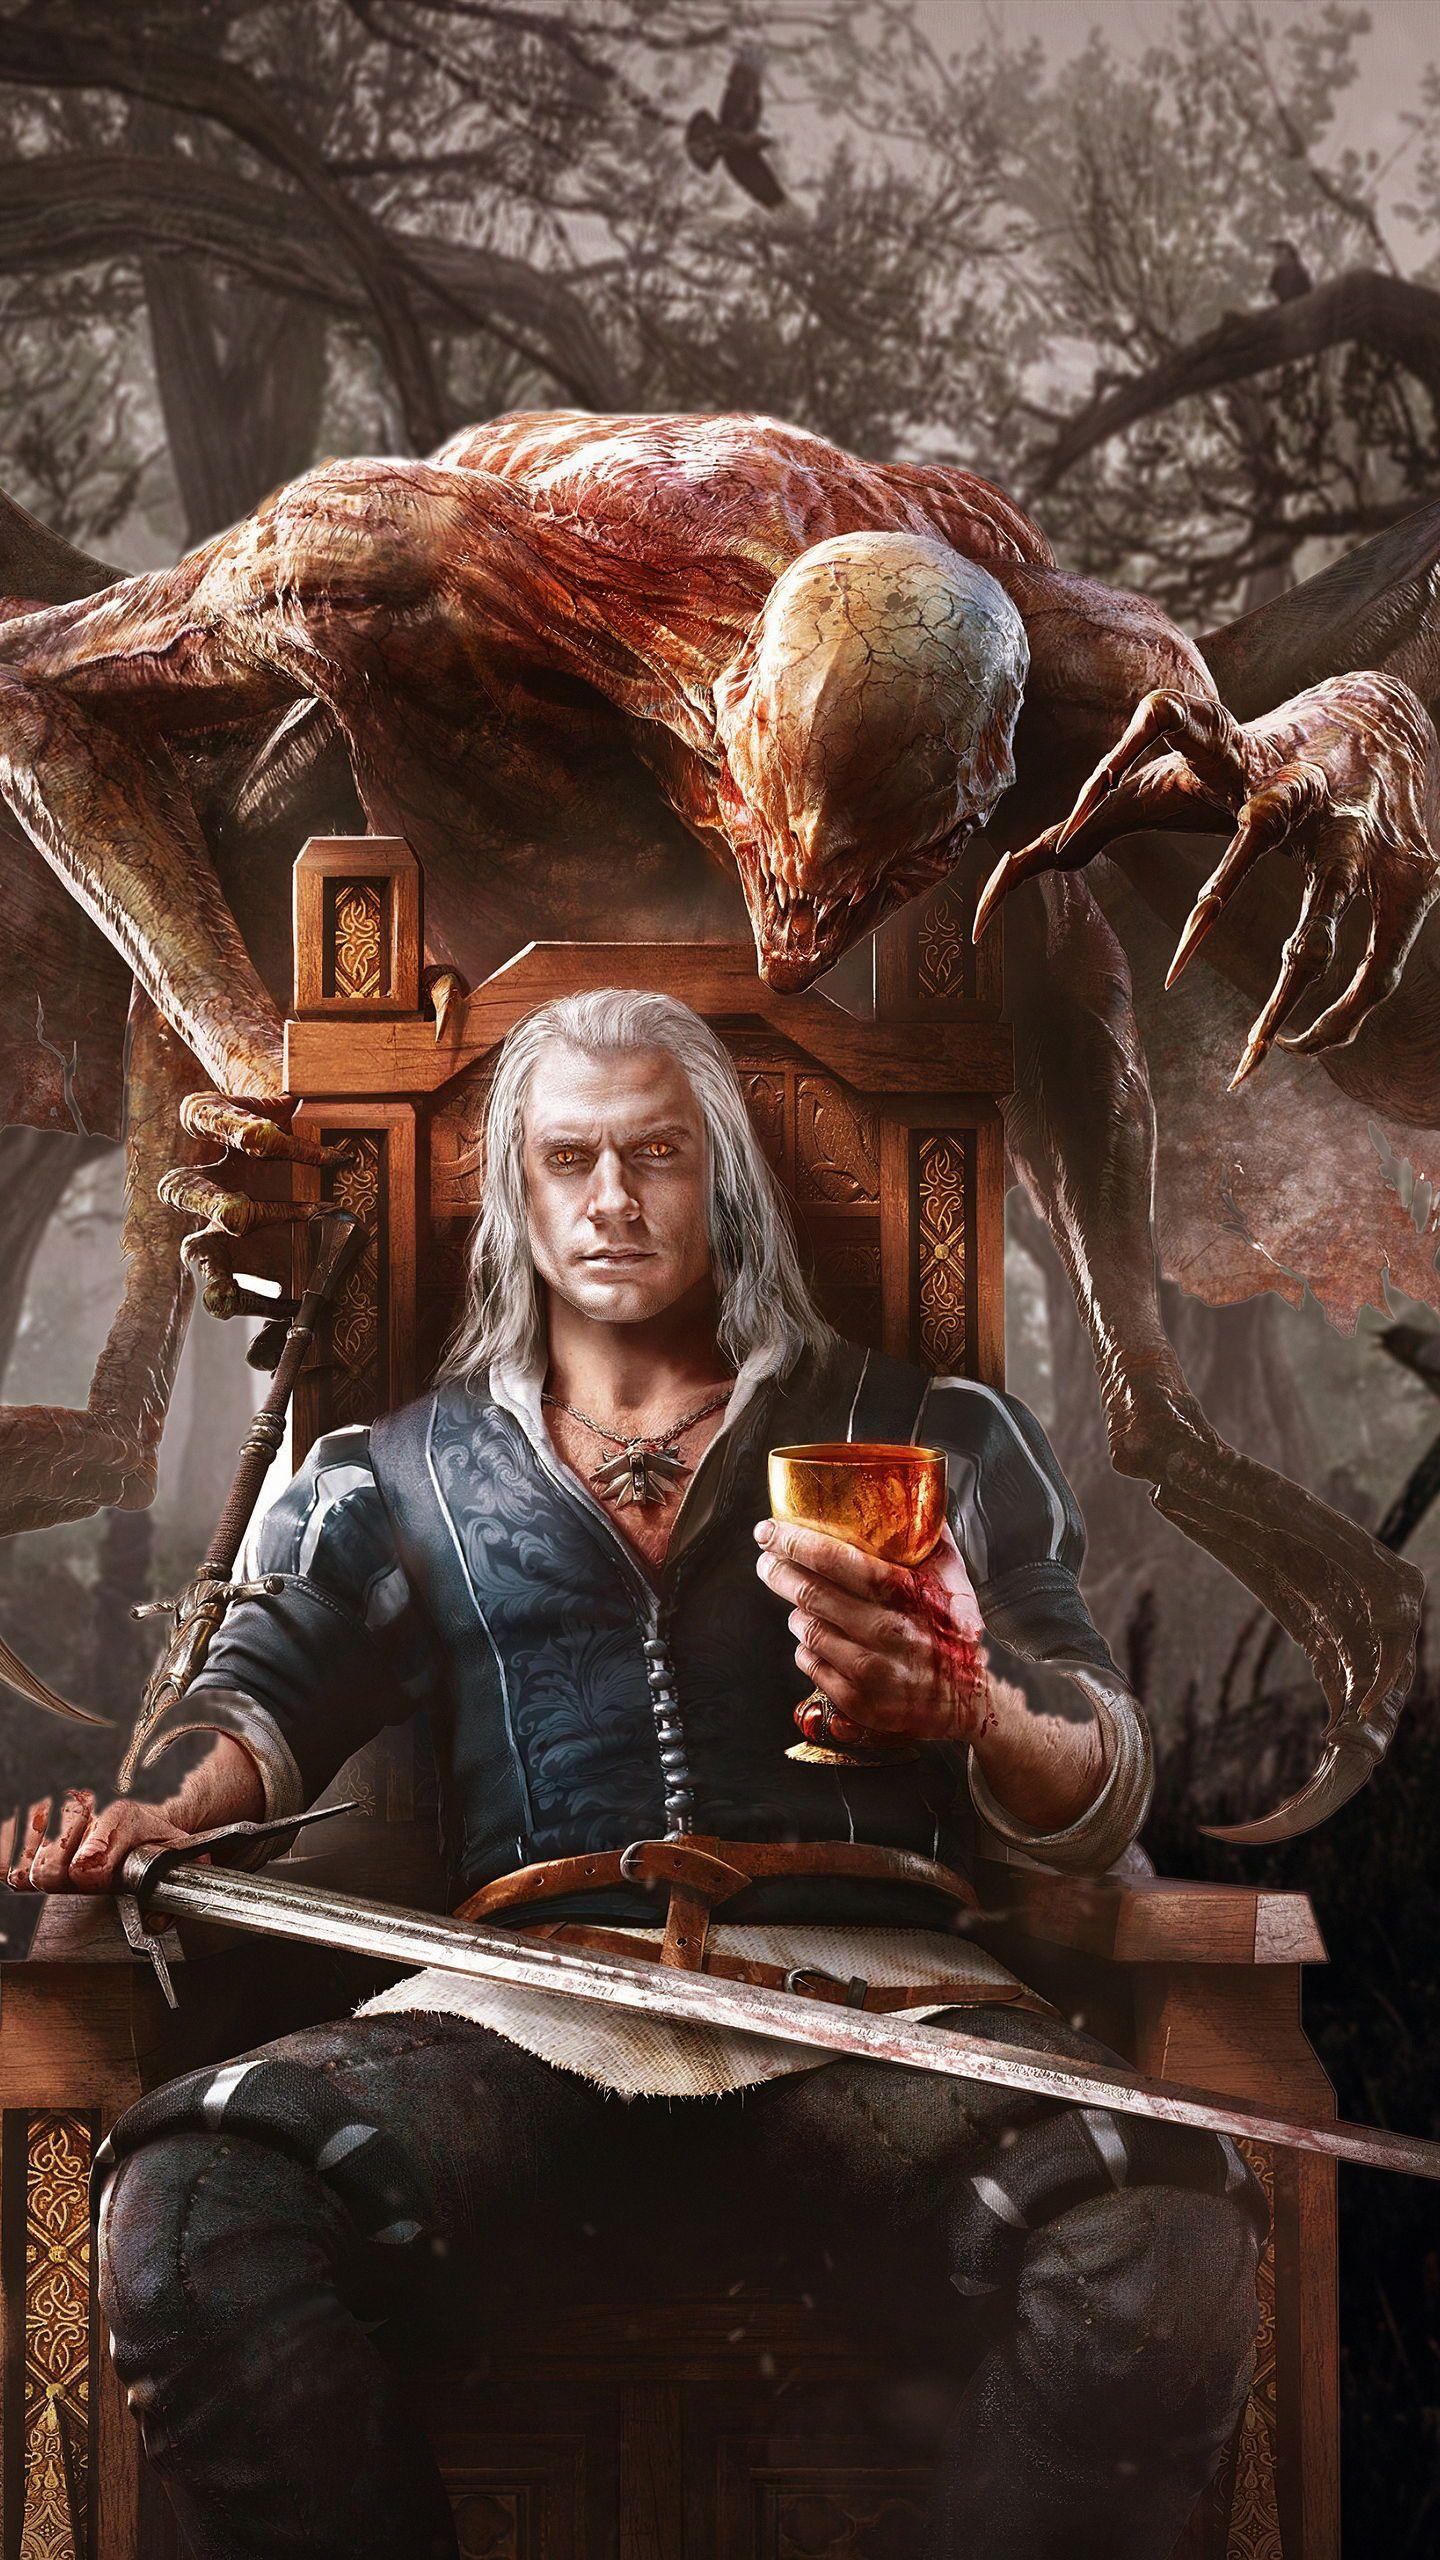 THE WITCHER NETFLIX TV SERIES: RELEASE DATE, CAST, STORY